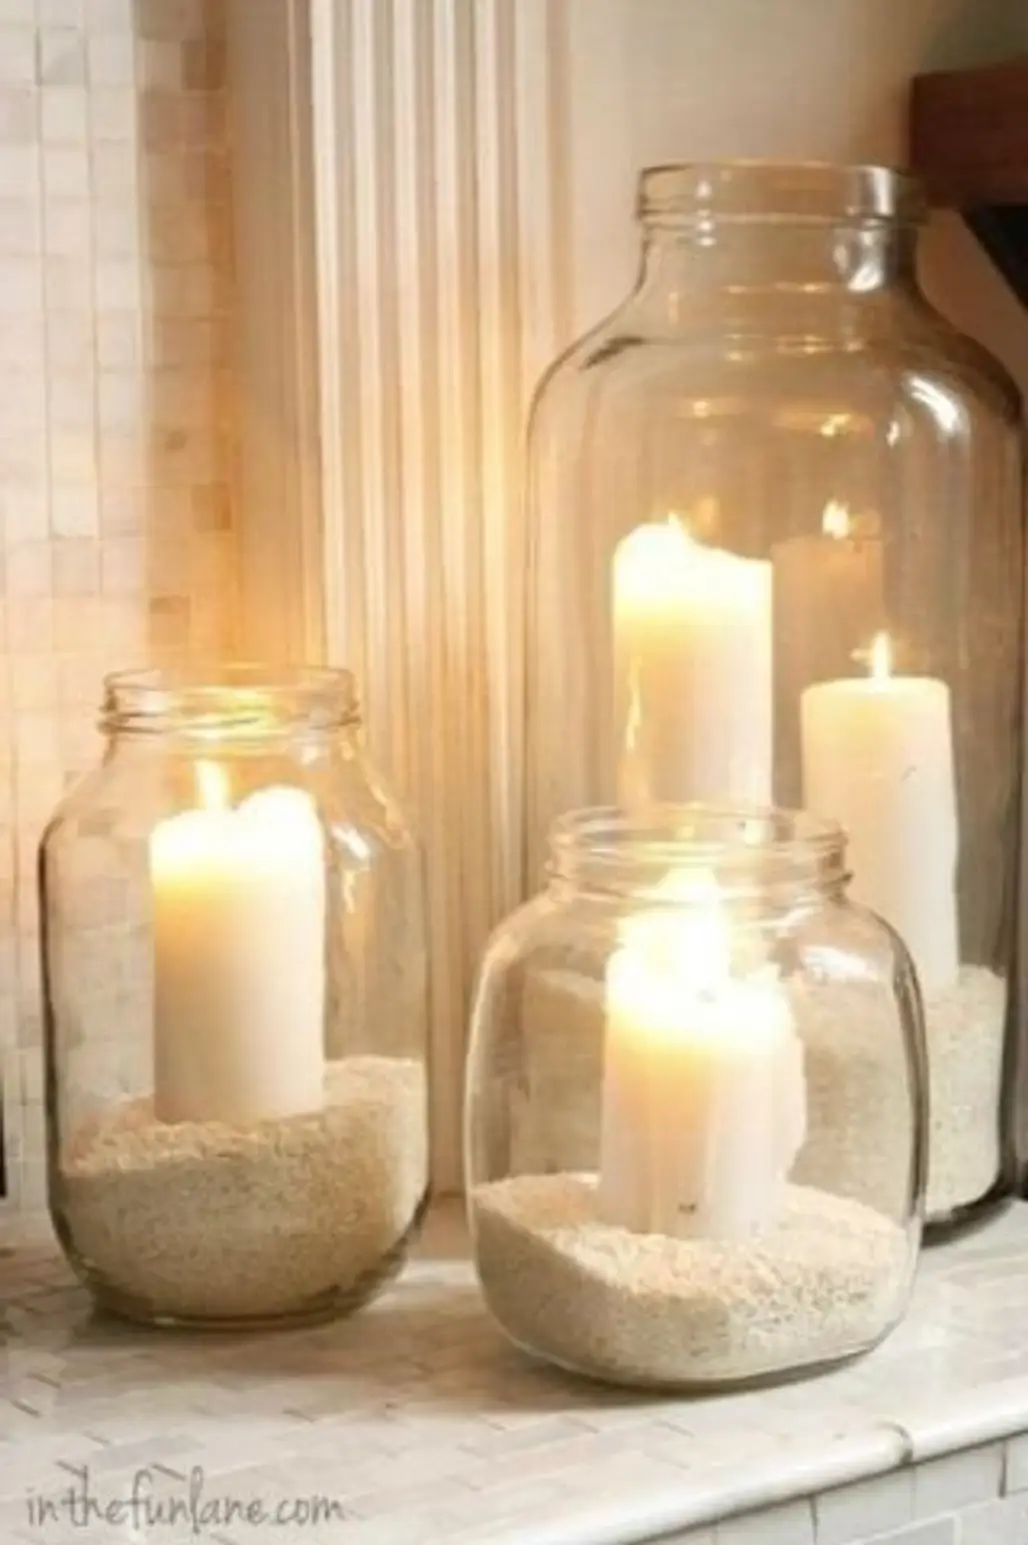 Go Easy with Sand in Jars